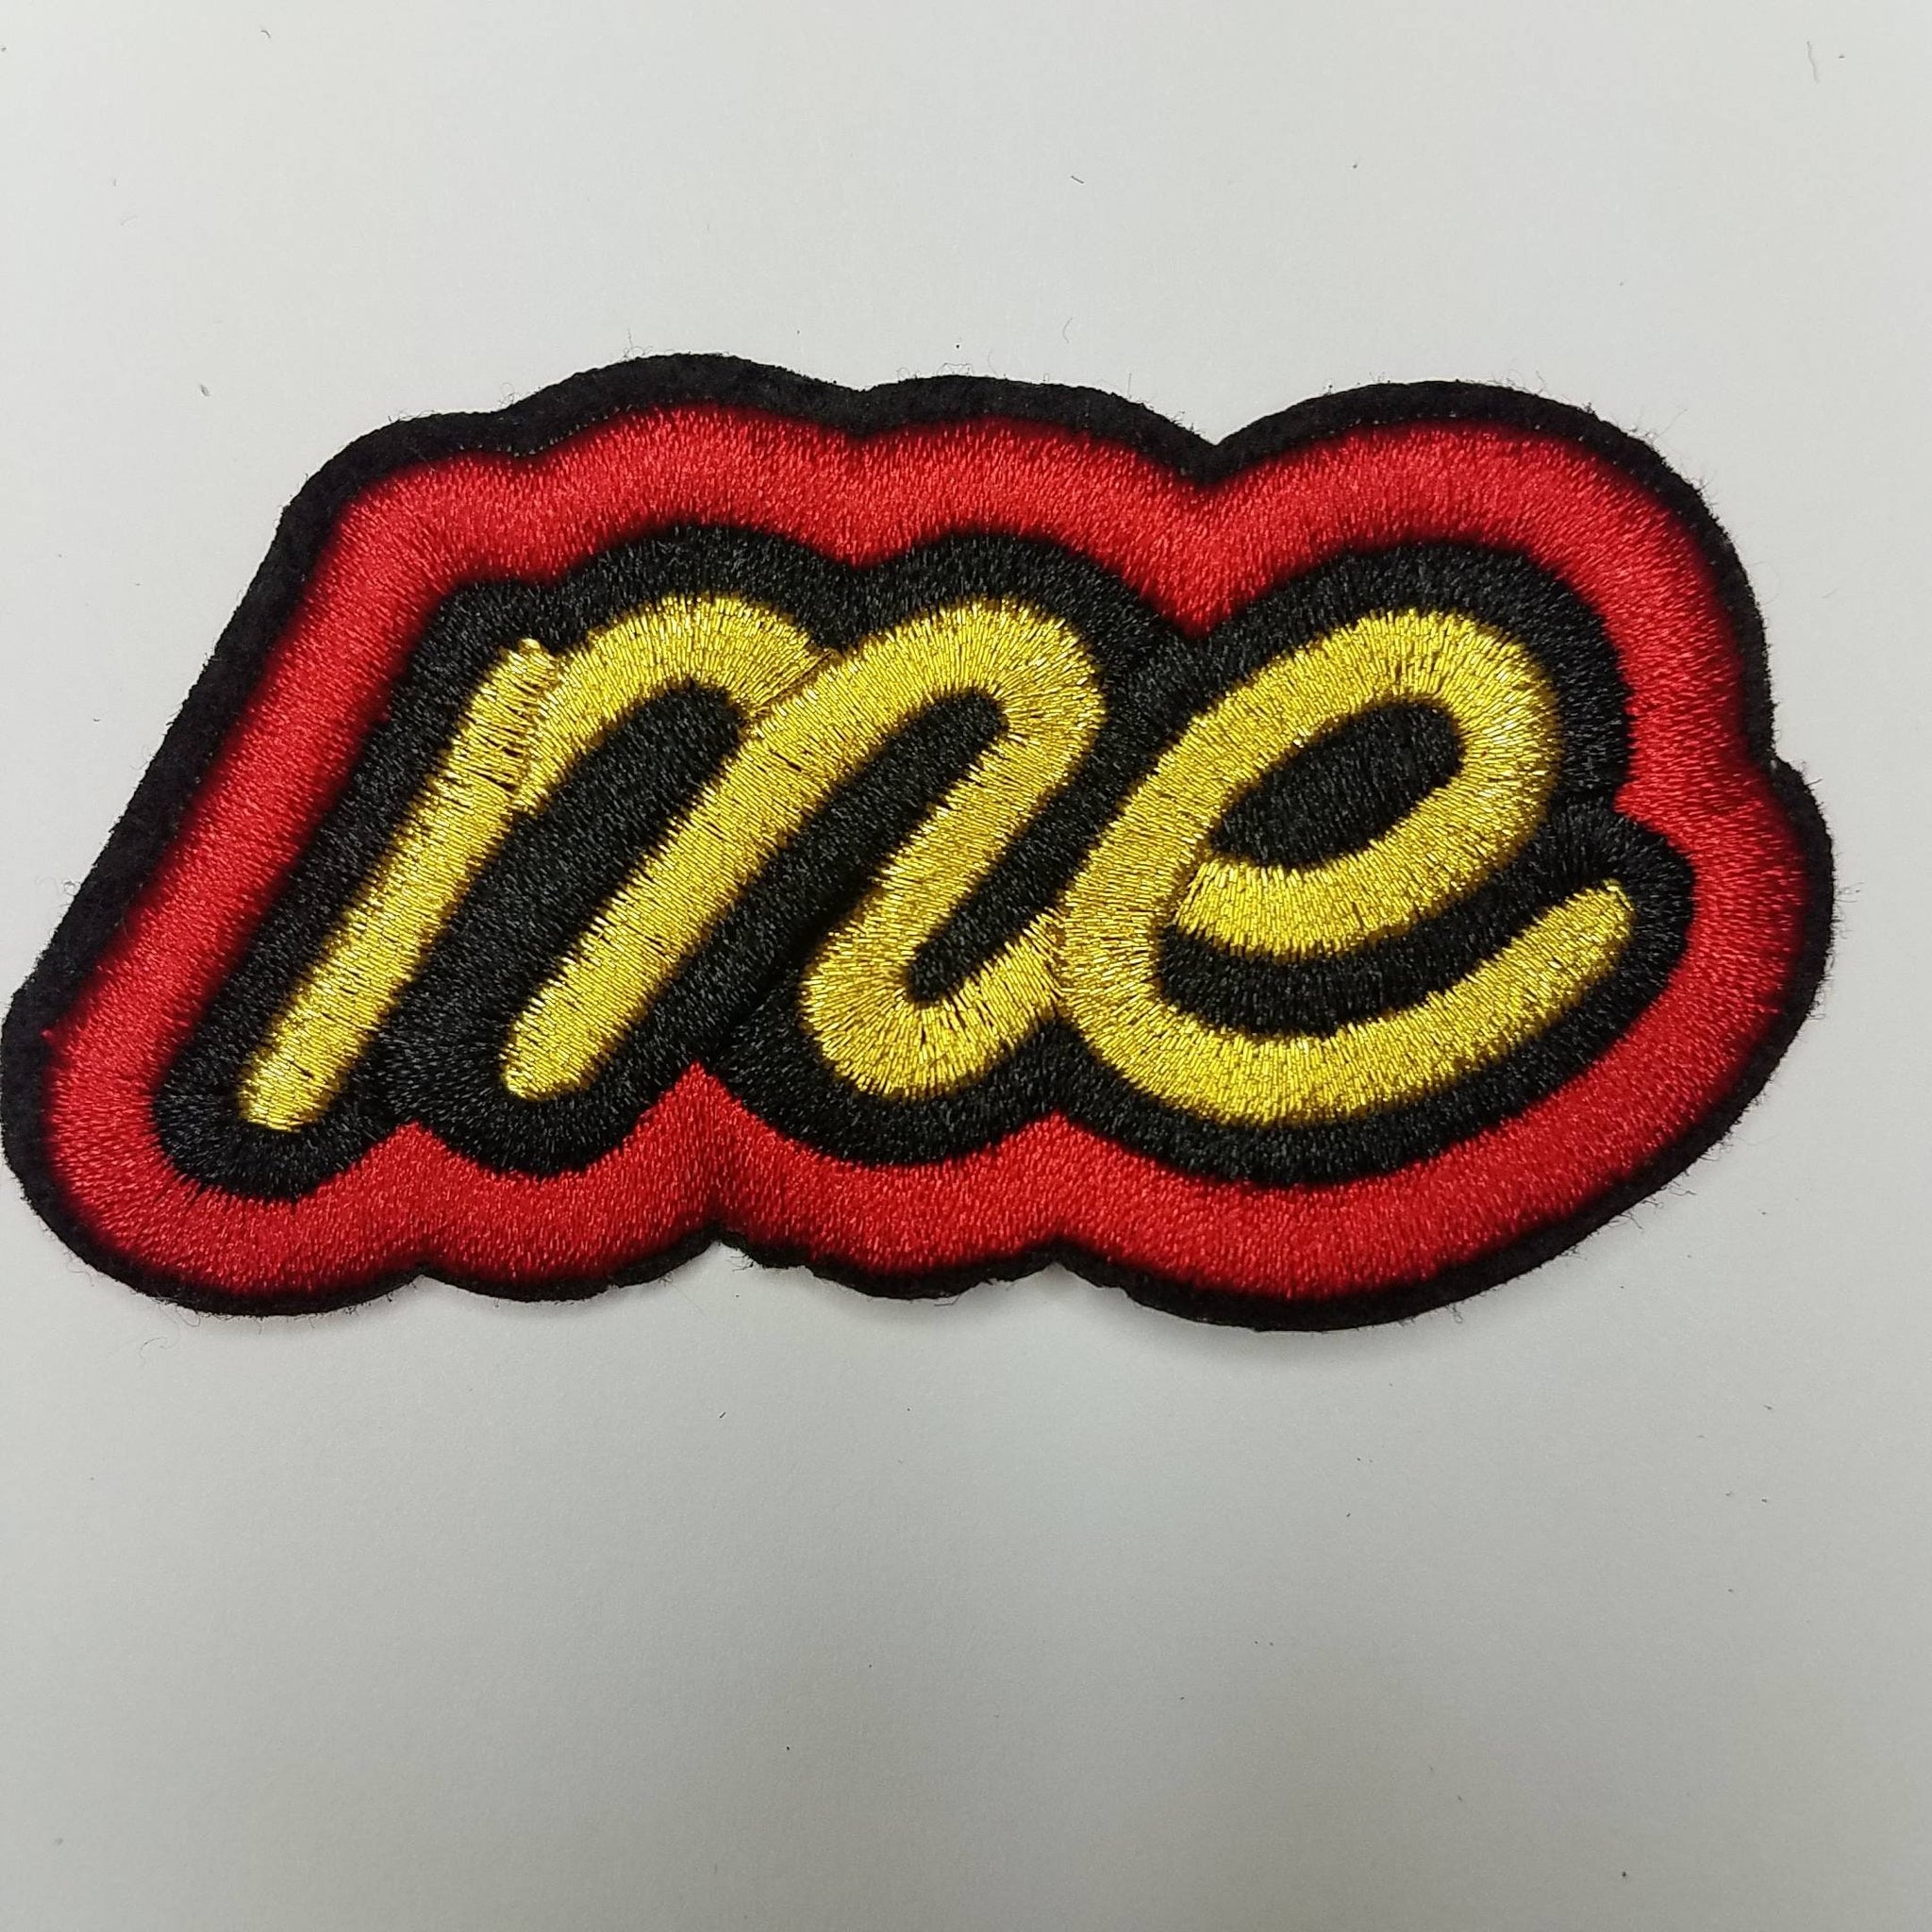 2-pc set, Metallic Me Patch, Gold, Black, and Red Iron-On Embroidere –  PatchPartyClub